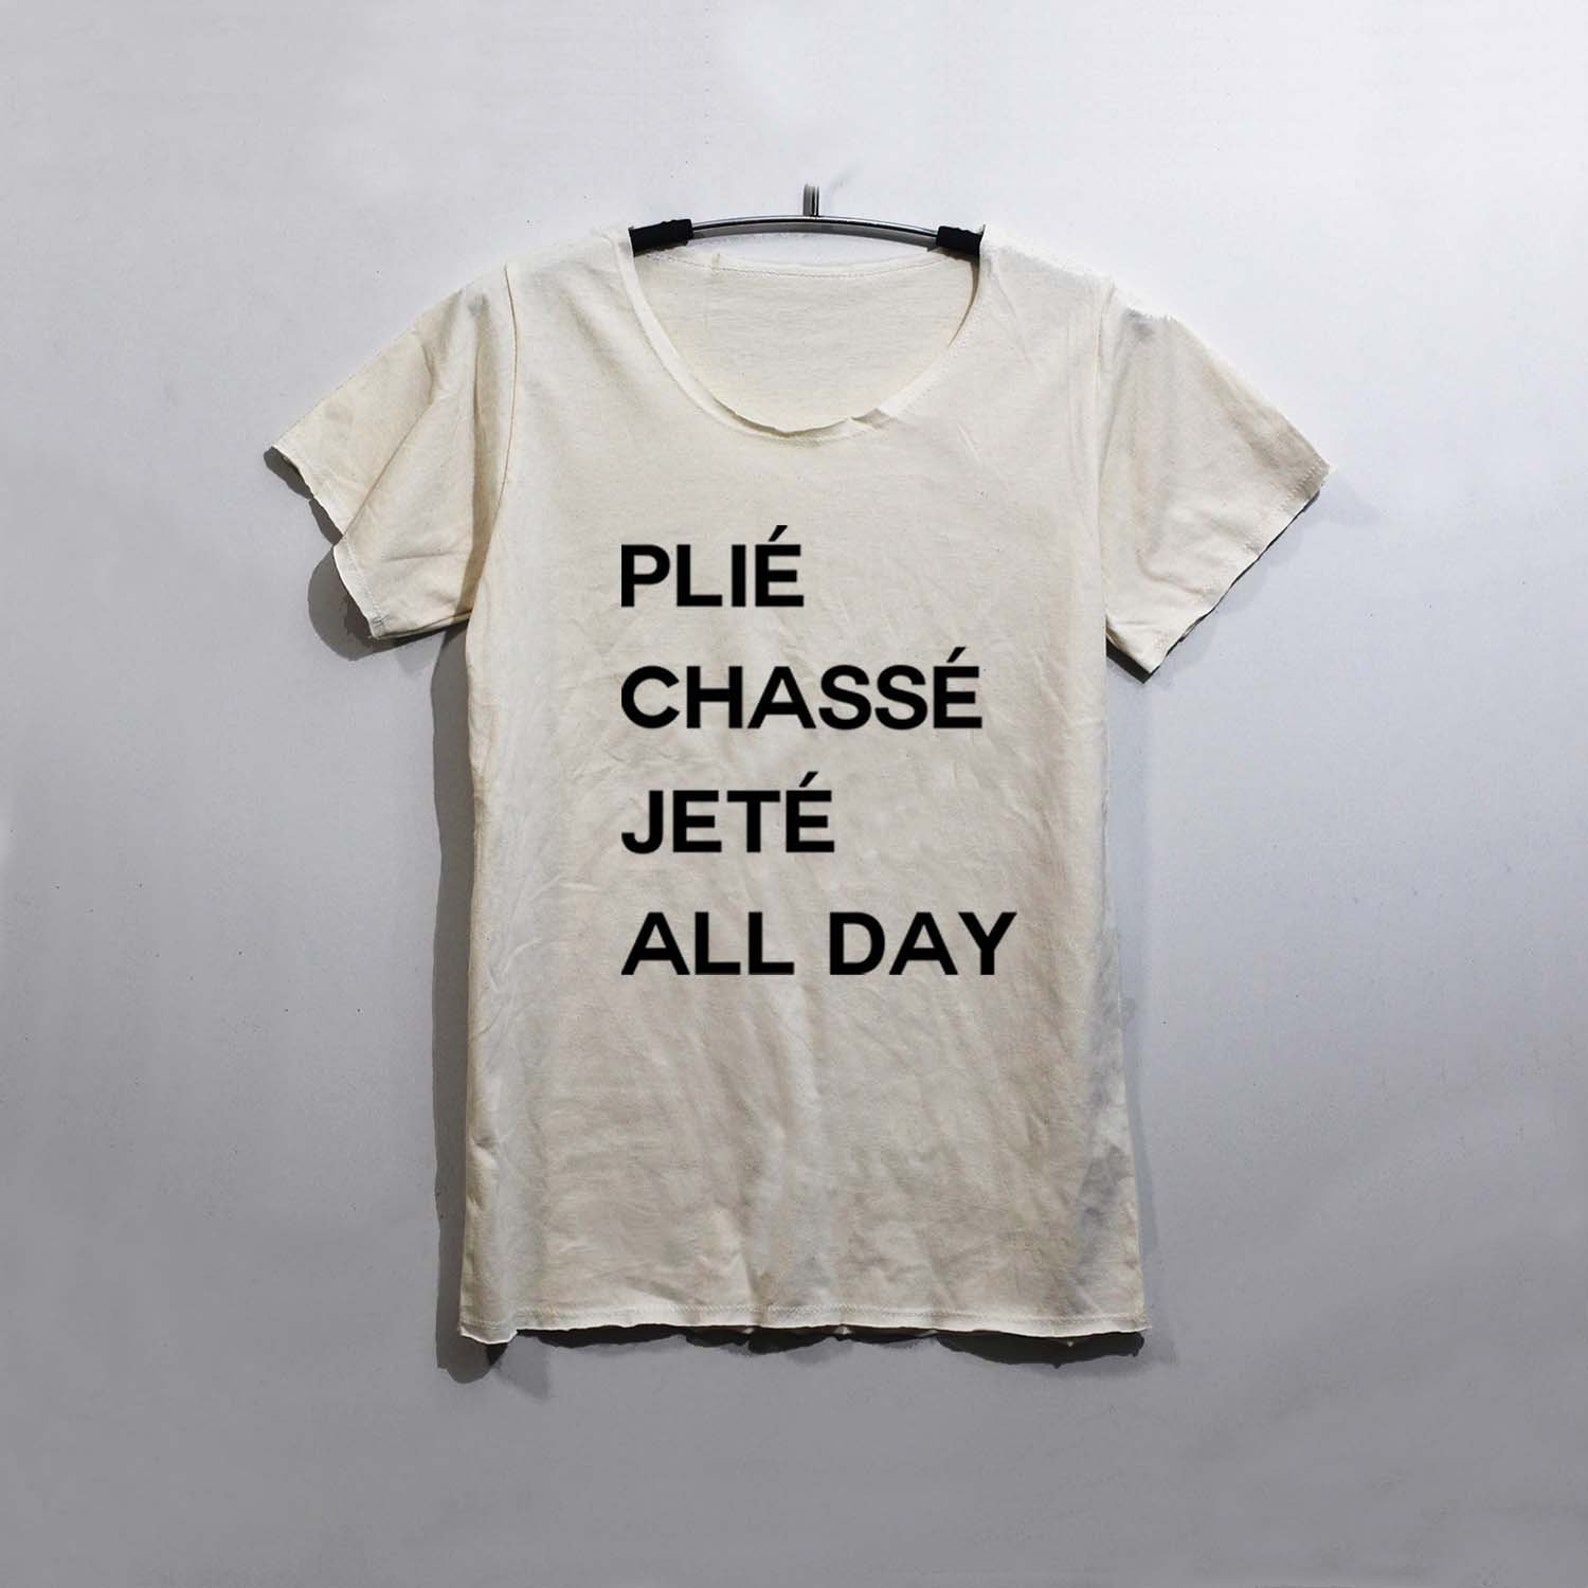 Plie Chasse Jete All Day Shirt Slouchy TShirt T Shirt Tee | Etsy